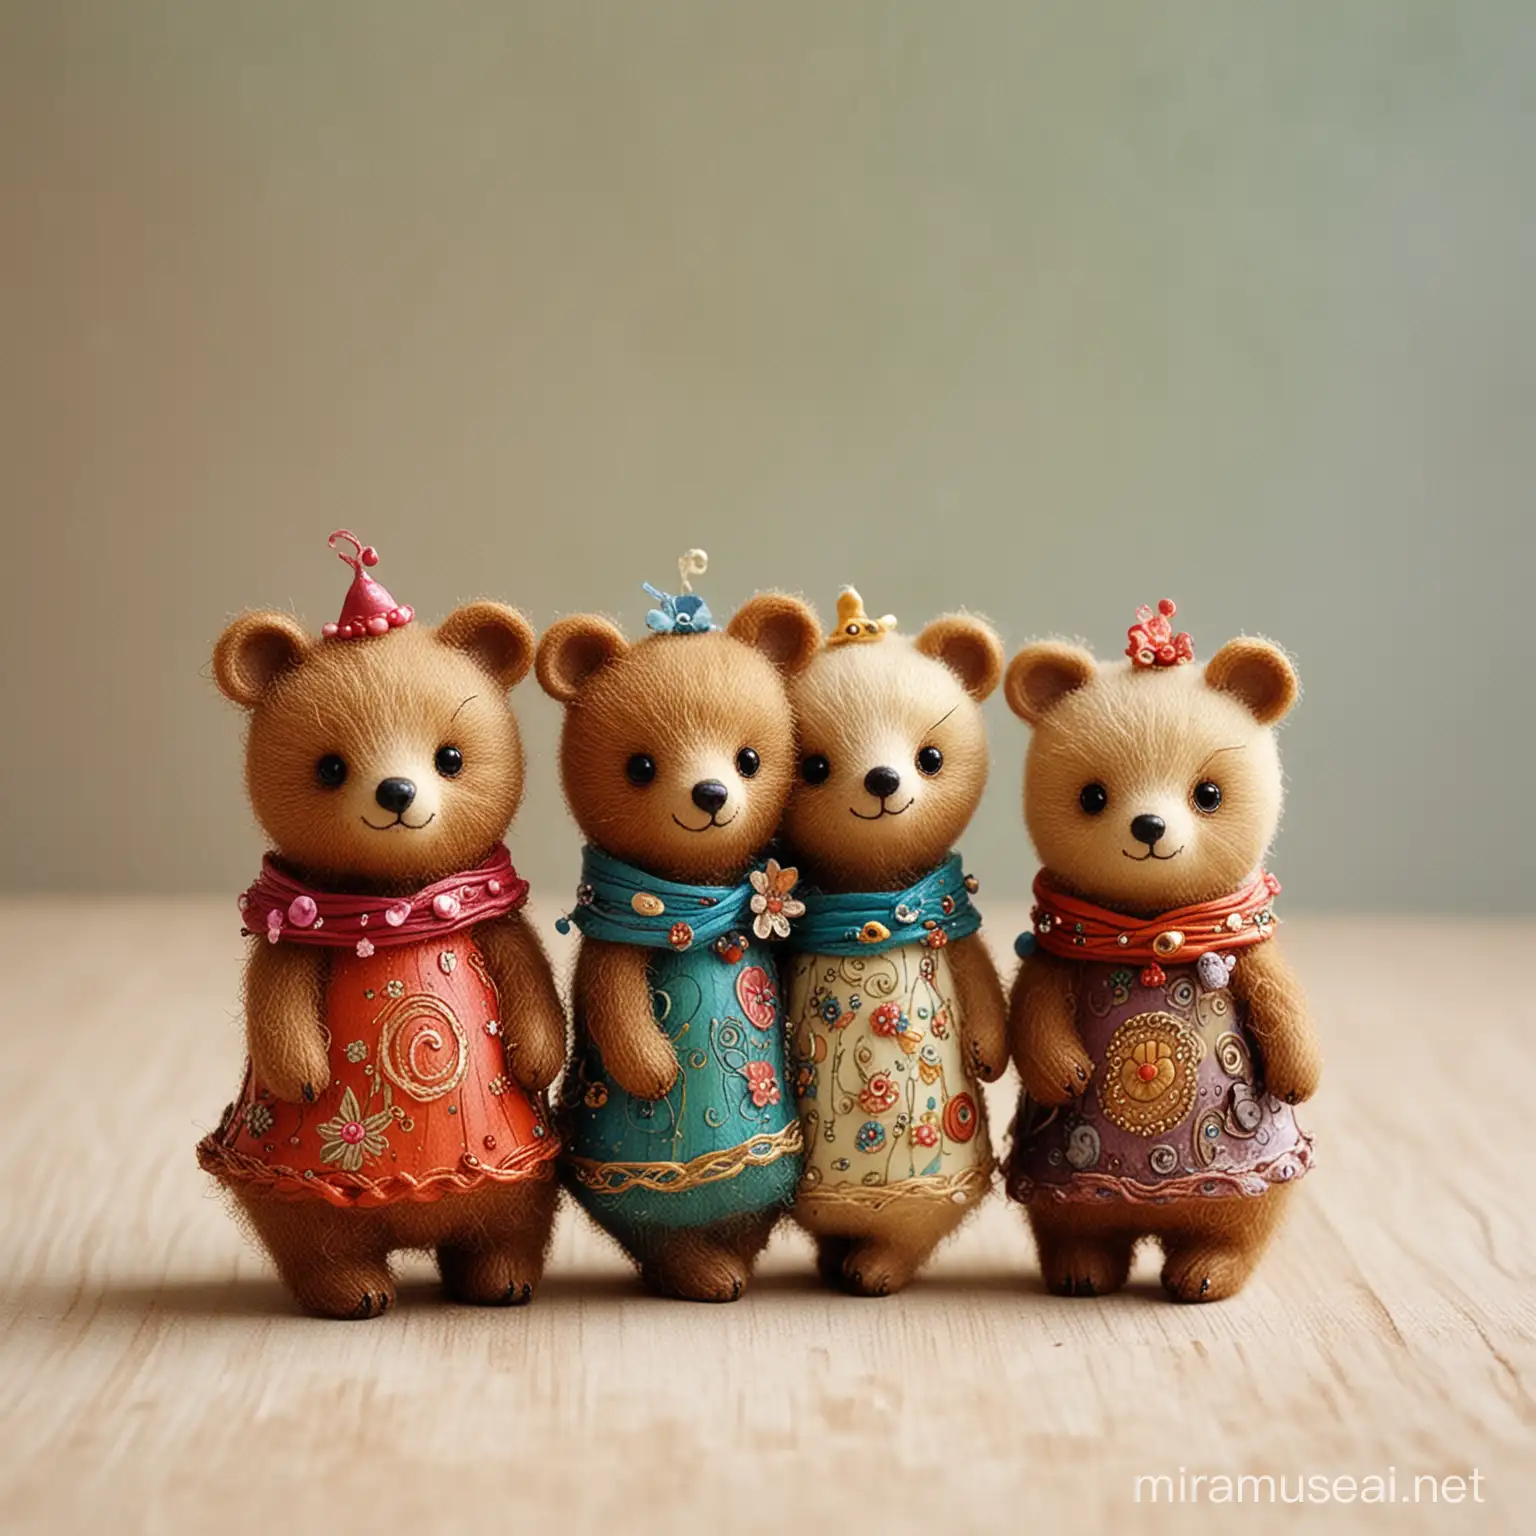 Whimsical Art Little Bears Frolicking in a Enchanted Forest